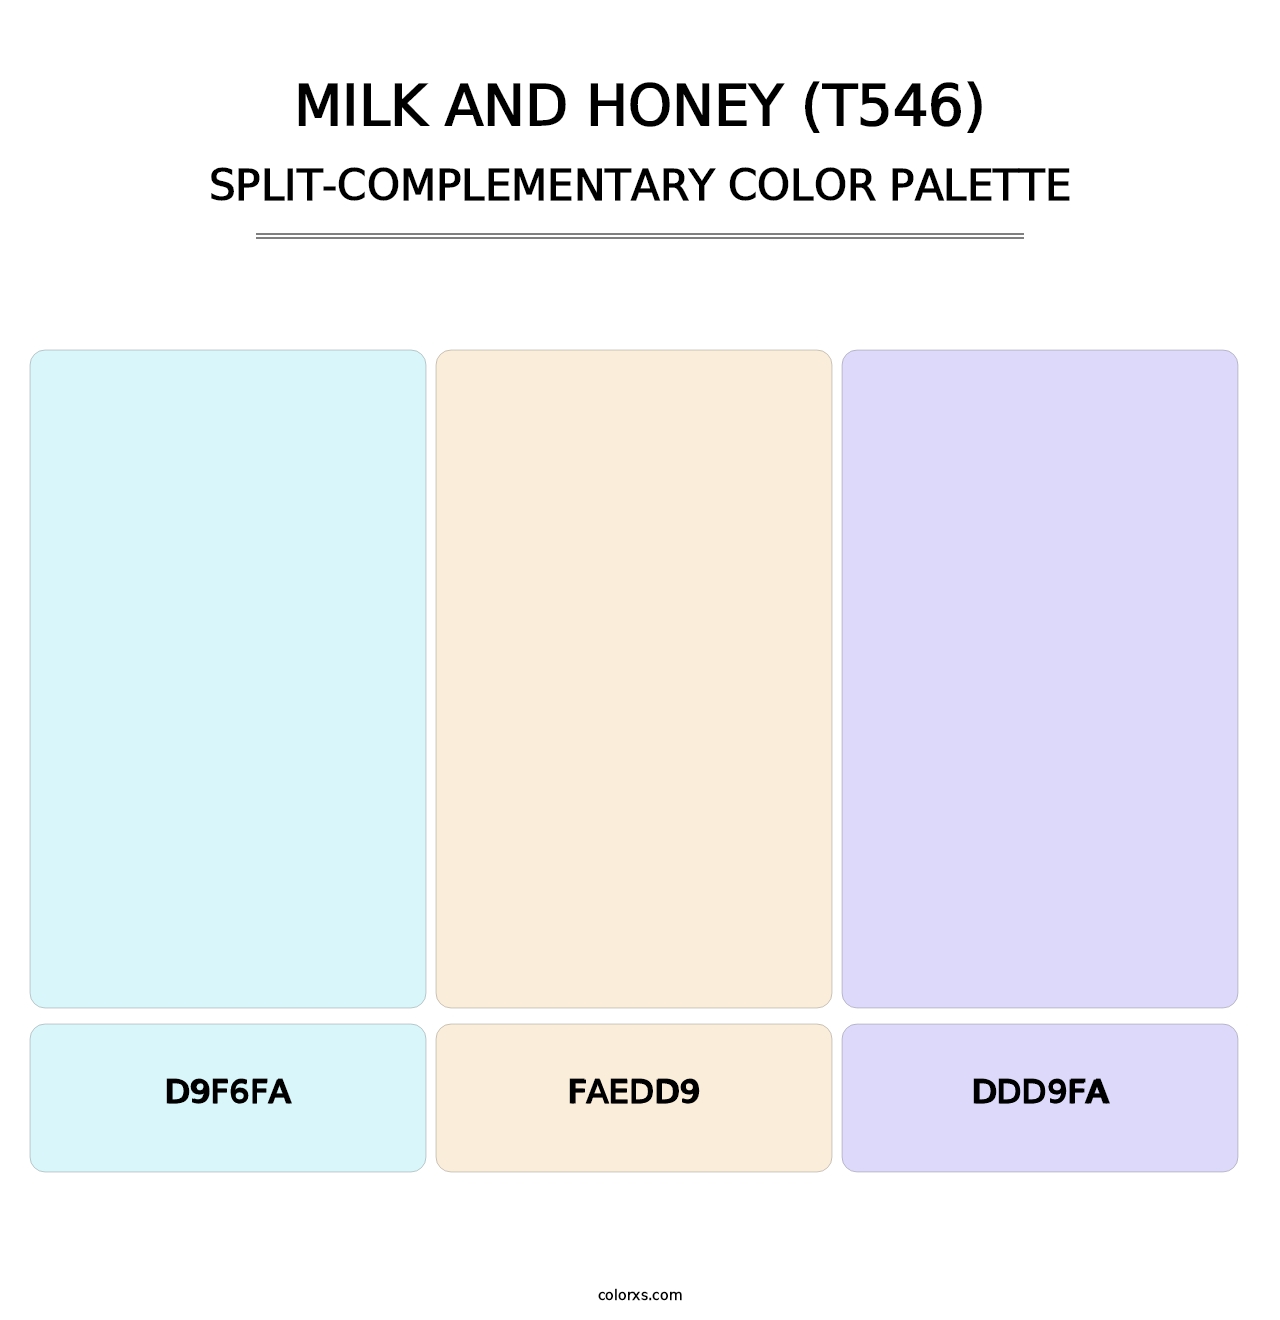 Milk and Honey (T546) - Split-Complementary Color Palette